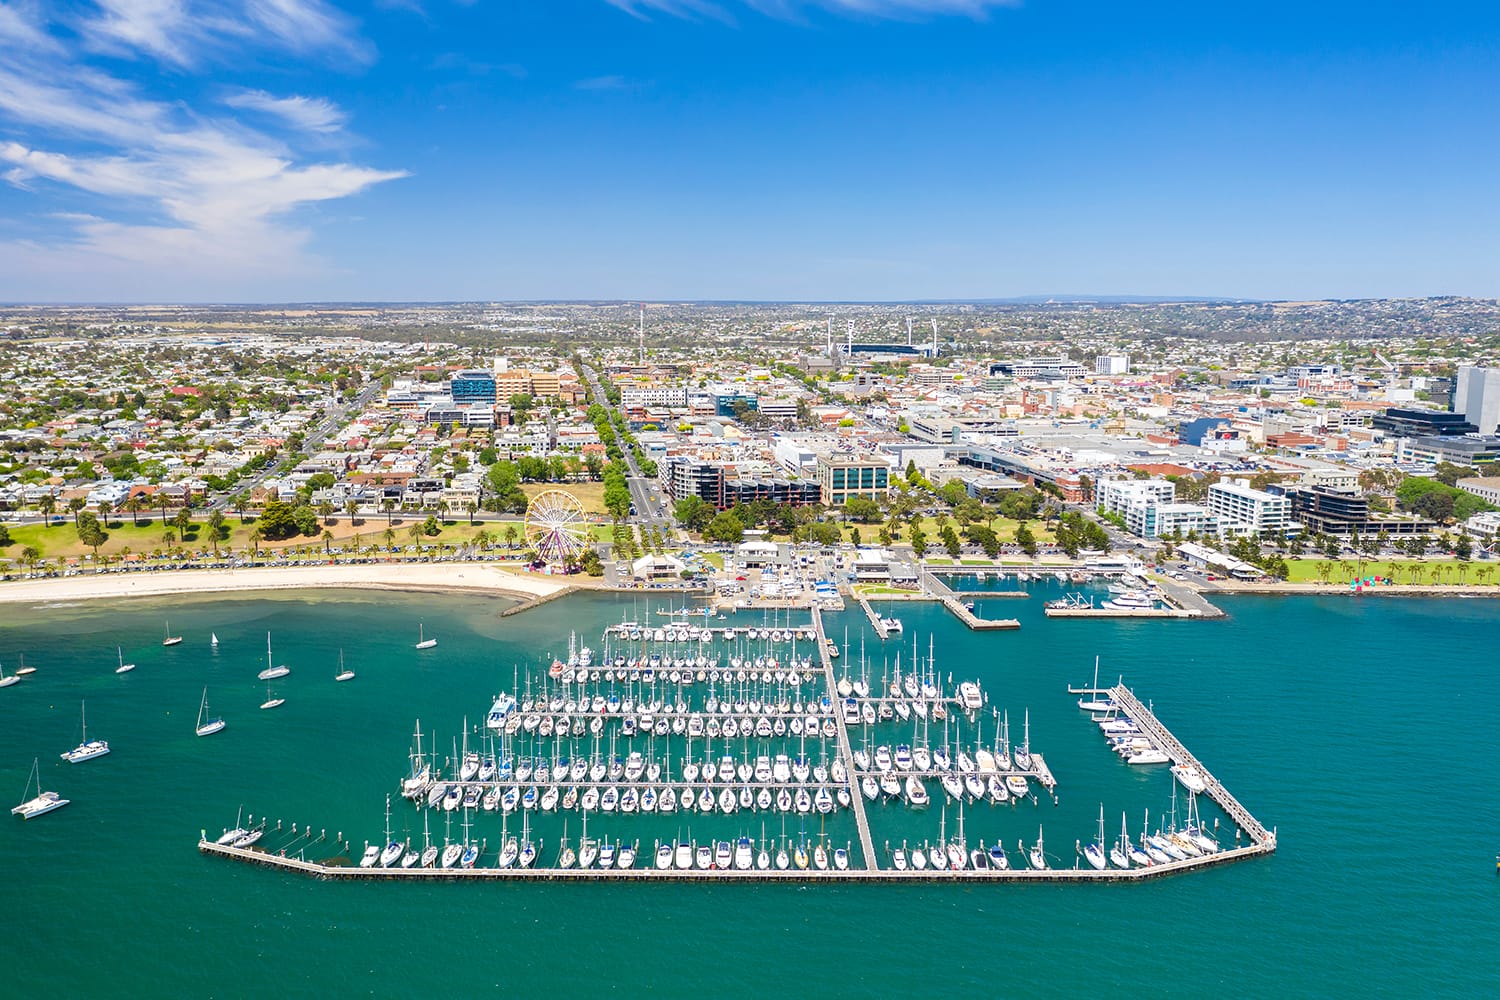 Aerial photo of city centre of Geelong in Victoria, Australia